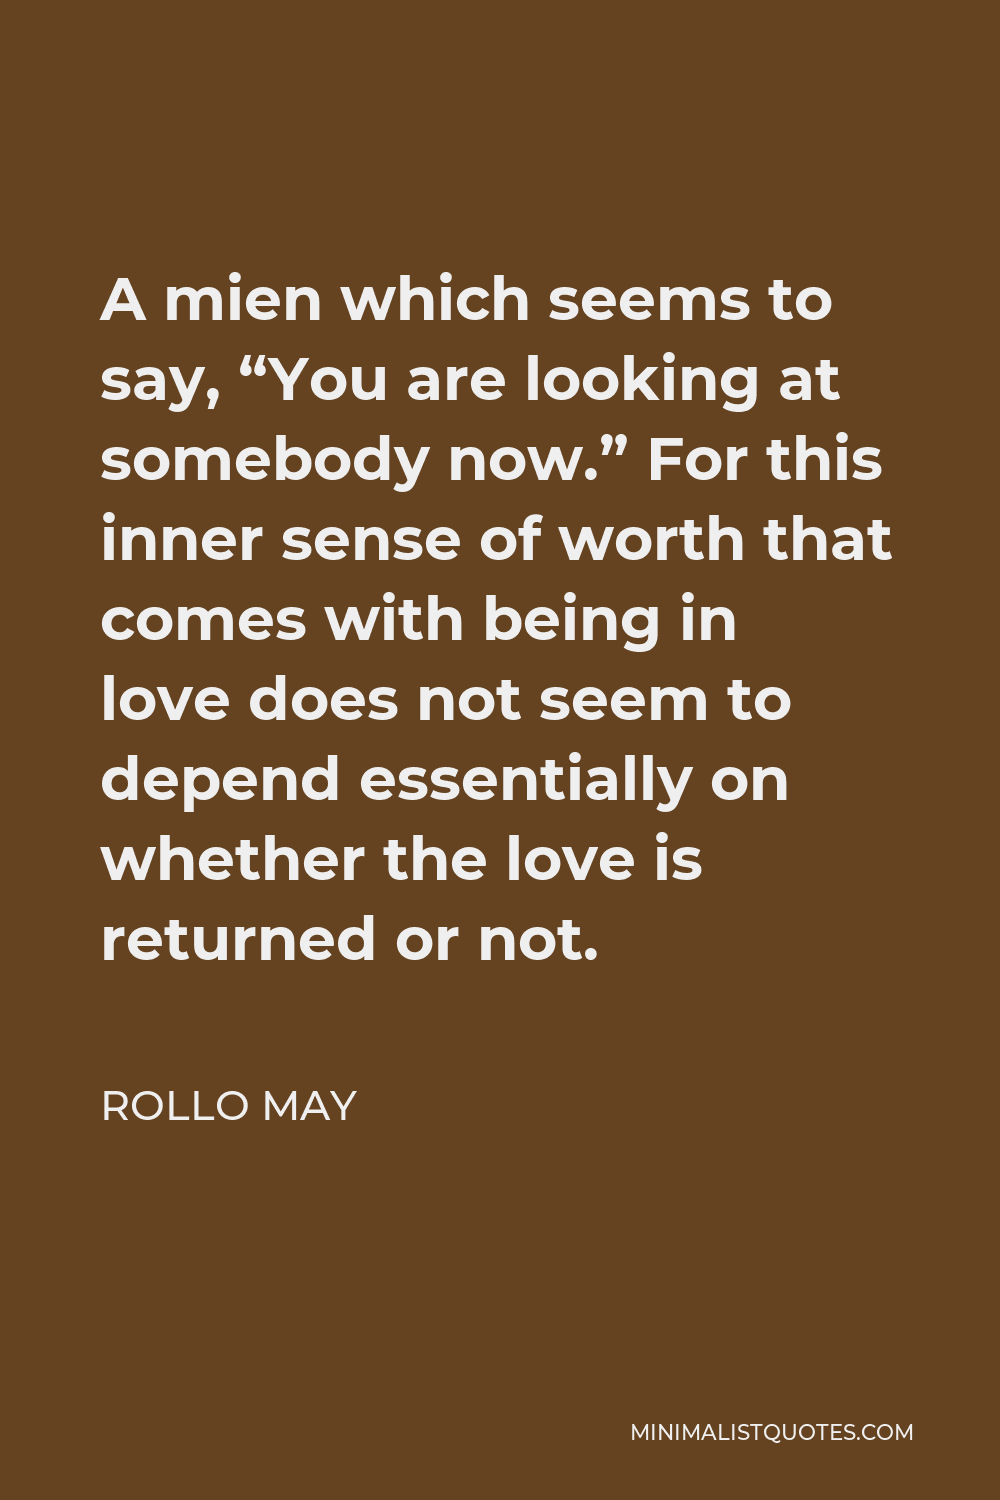 Rollo May Quote - A mien which seems to say, “You are looking at somebody now.” For this inner sense of worth that comes with being in love does not seem to depend essentially on whether the love is returned or not.